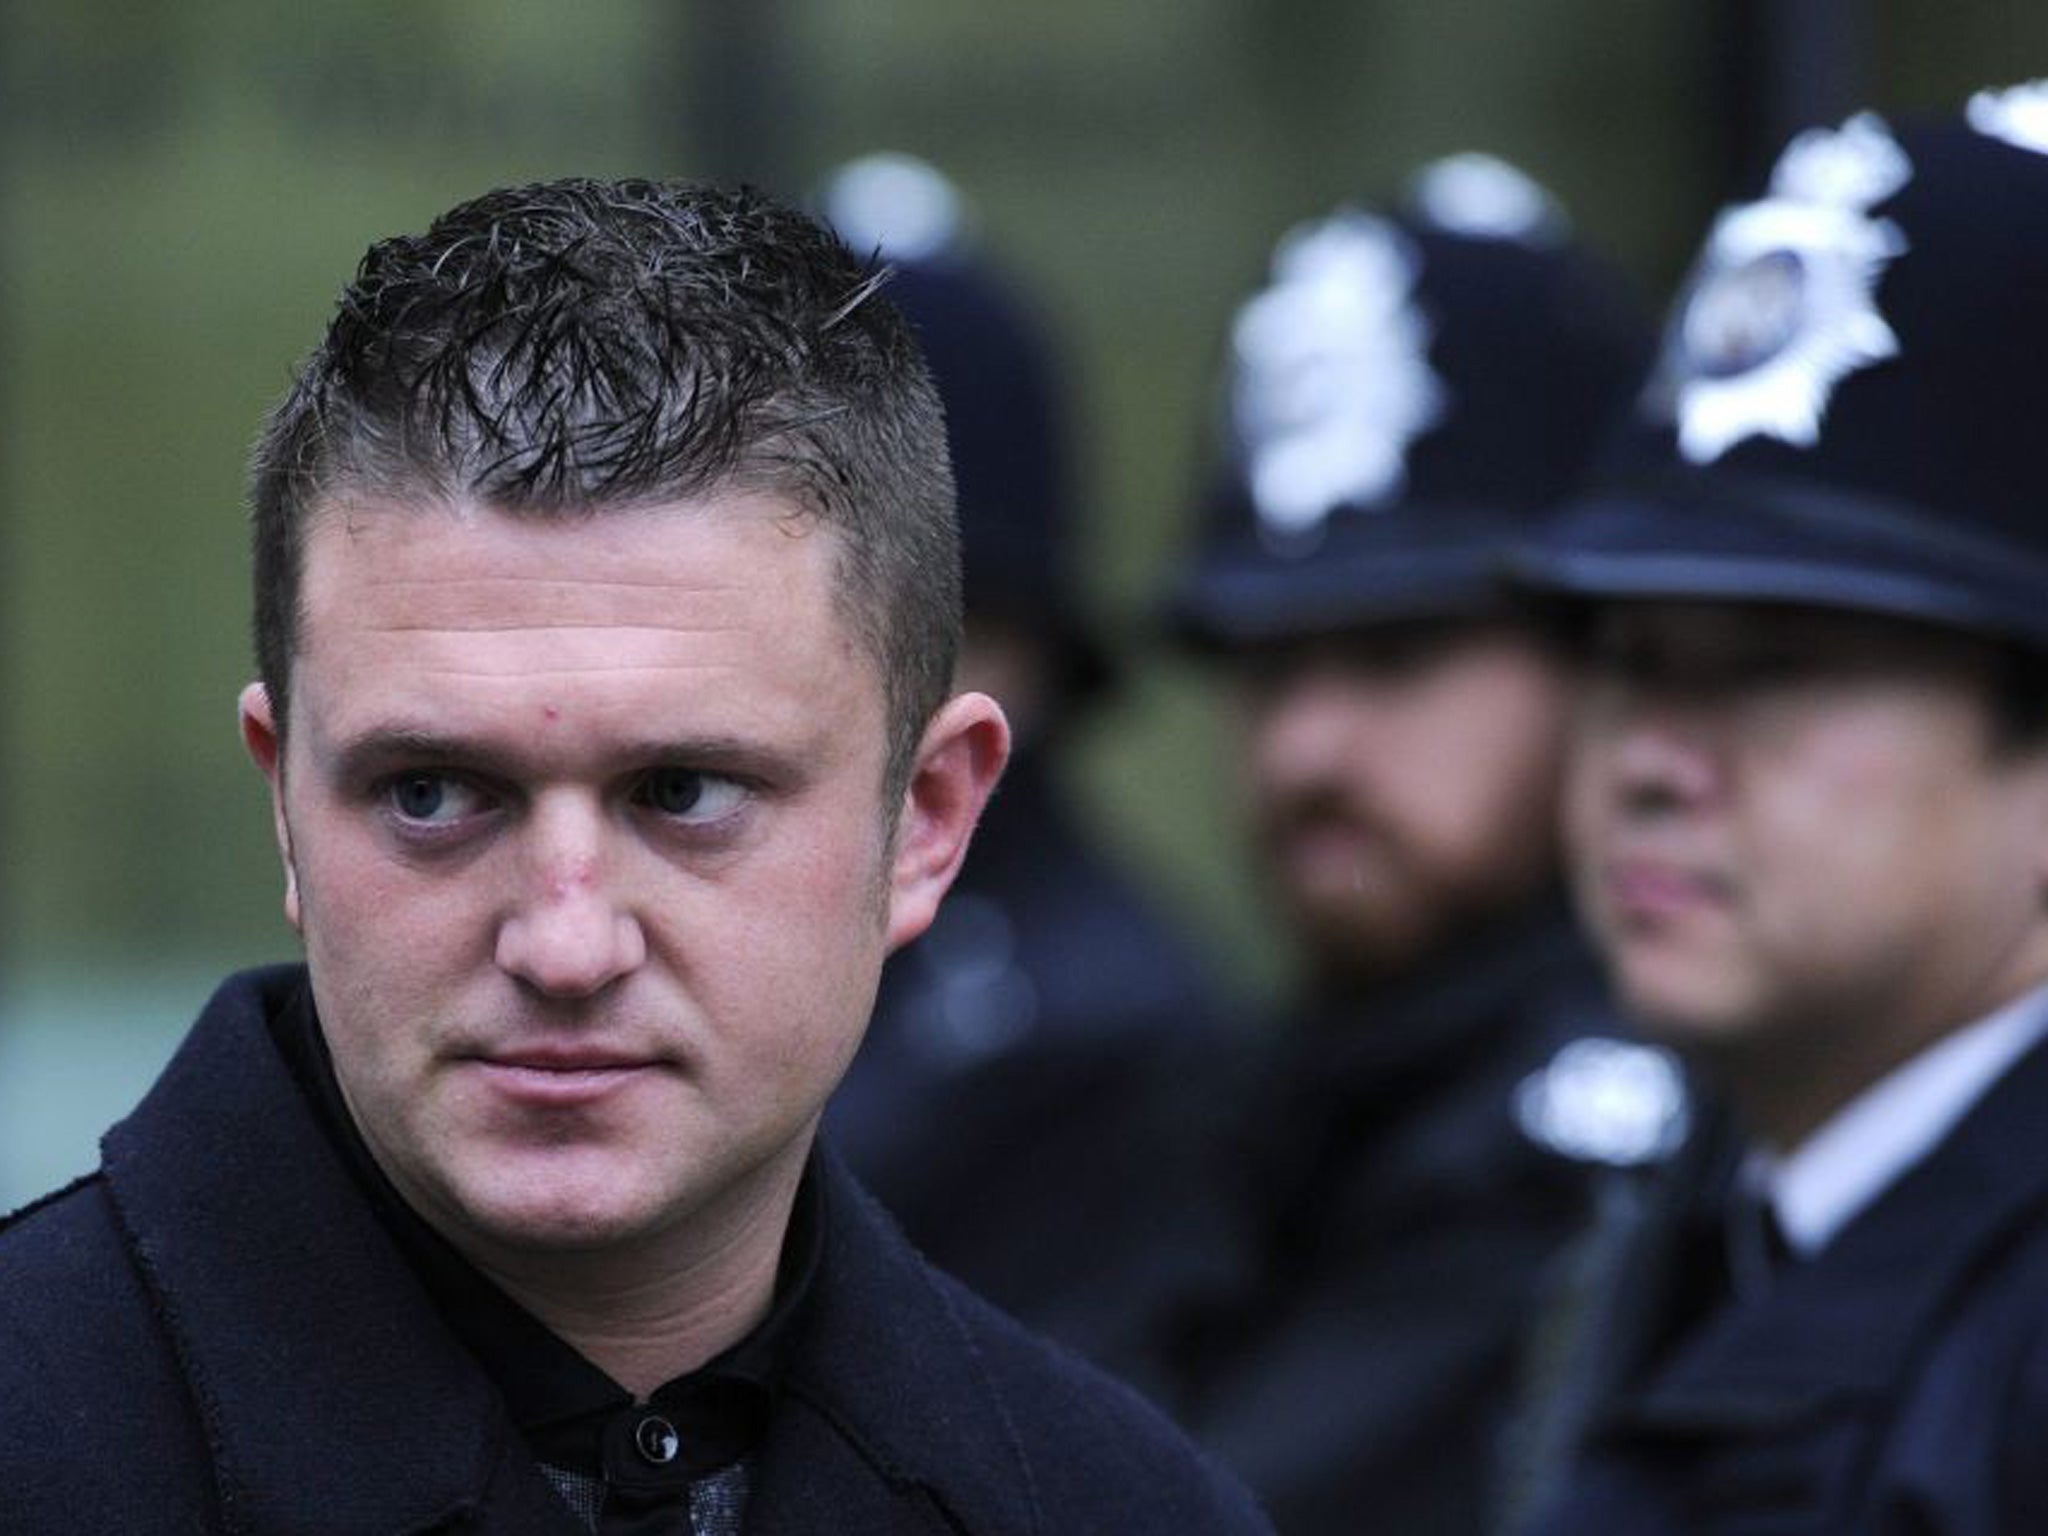 The resignation of EDL leader Tommy Robinson has changed the face of British far-right politics